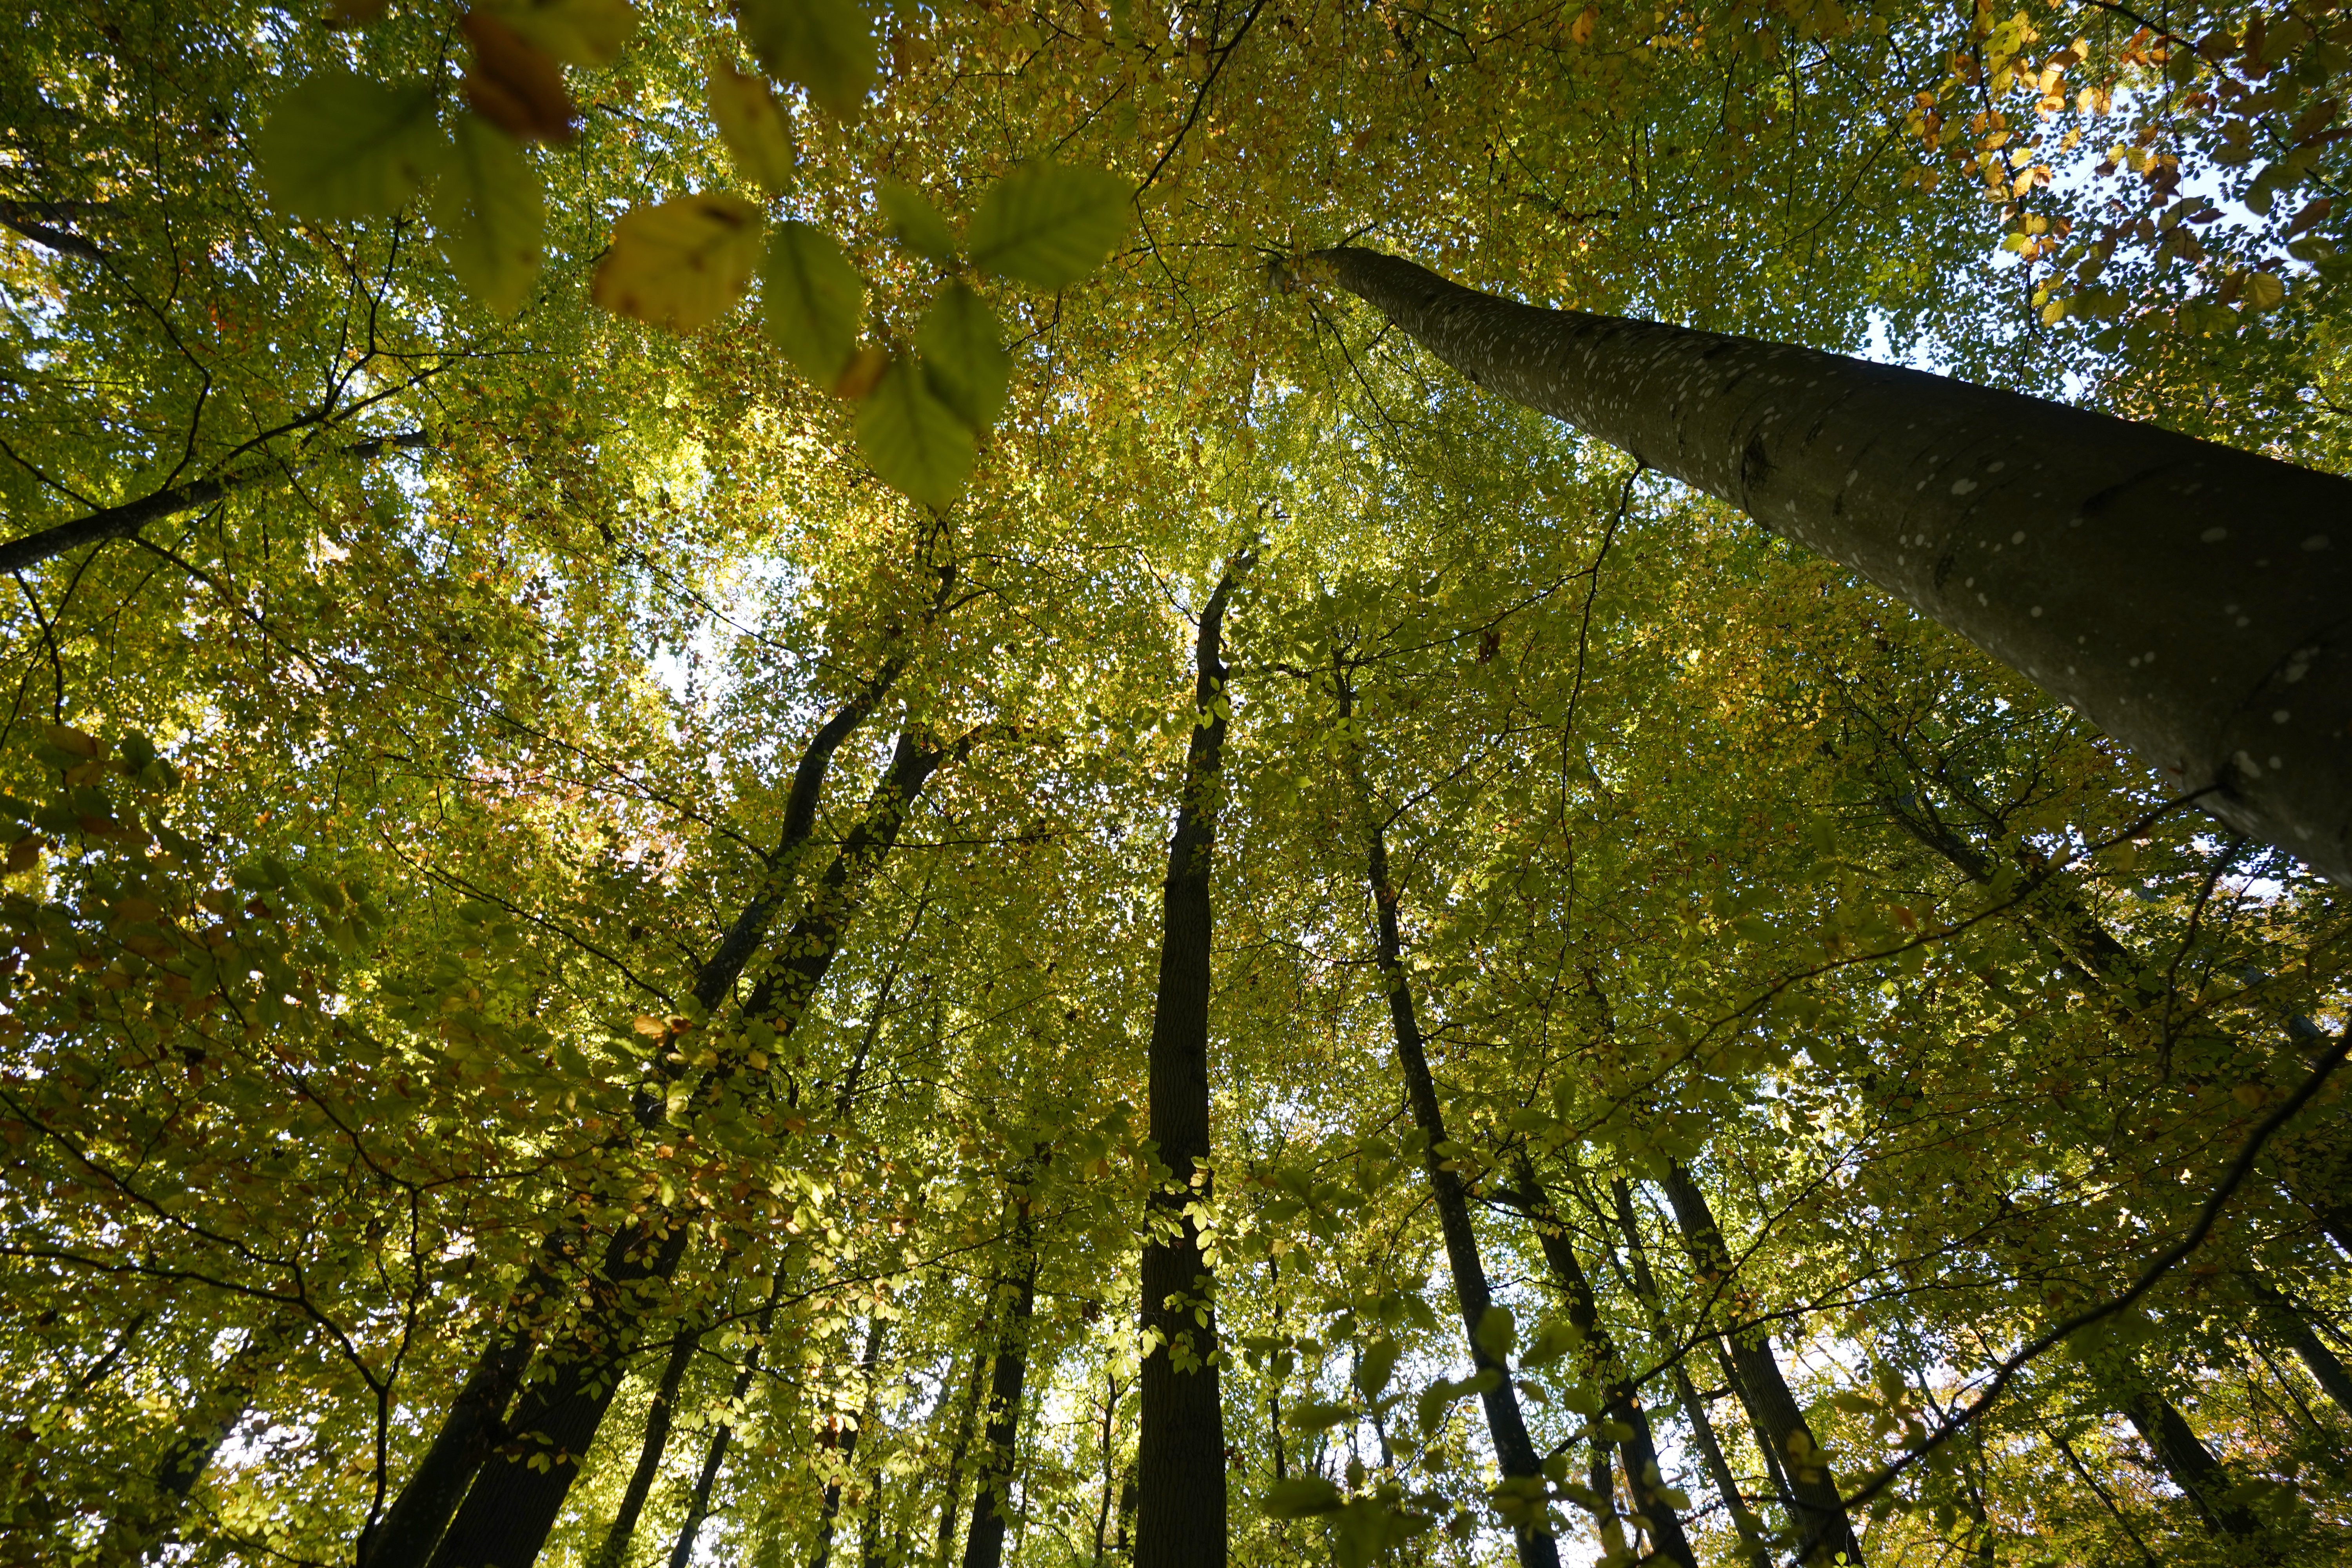 Beech and oak trees grow in the city forest. For around 30 years, the trees in Lübeck's city forest have been allowed to grow as they please. Foresters only rarely intervene in the forest ecosystem. (to dpa-KORR.: "Lübeck forest concept should save forests and climate")